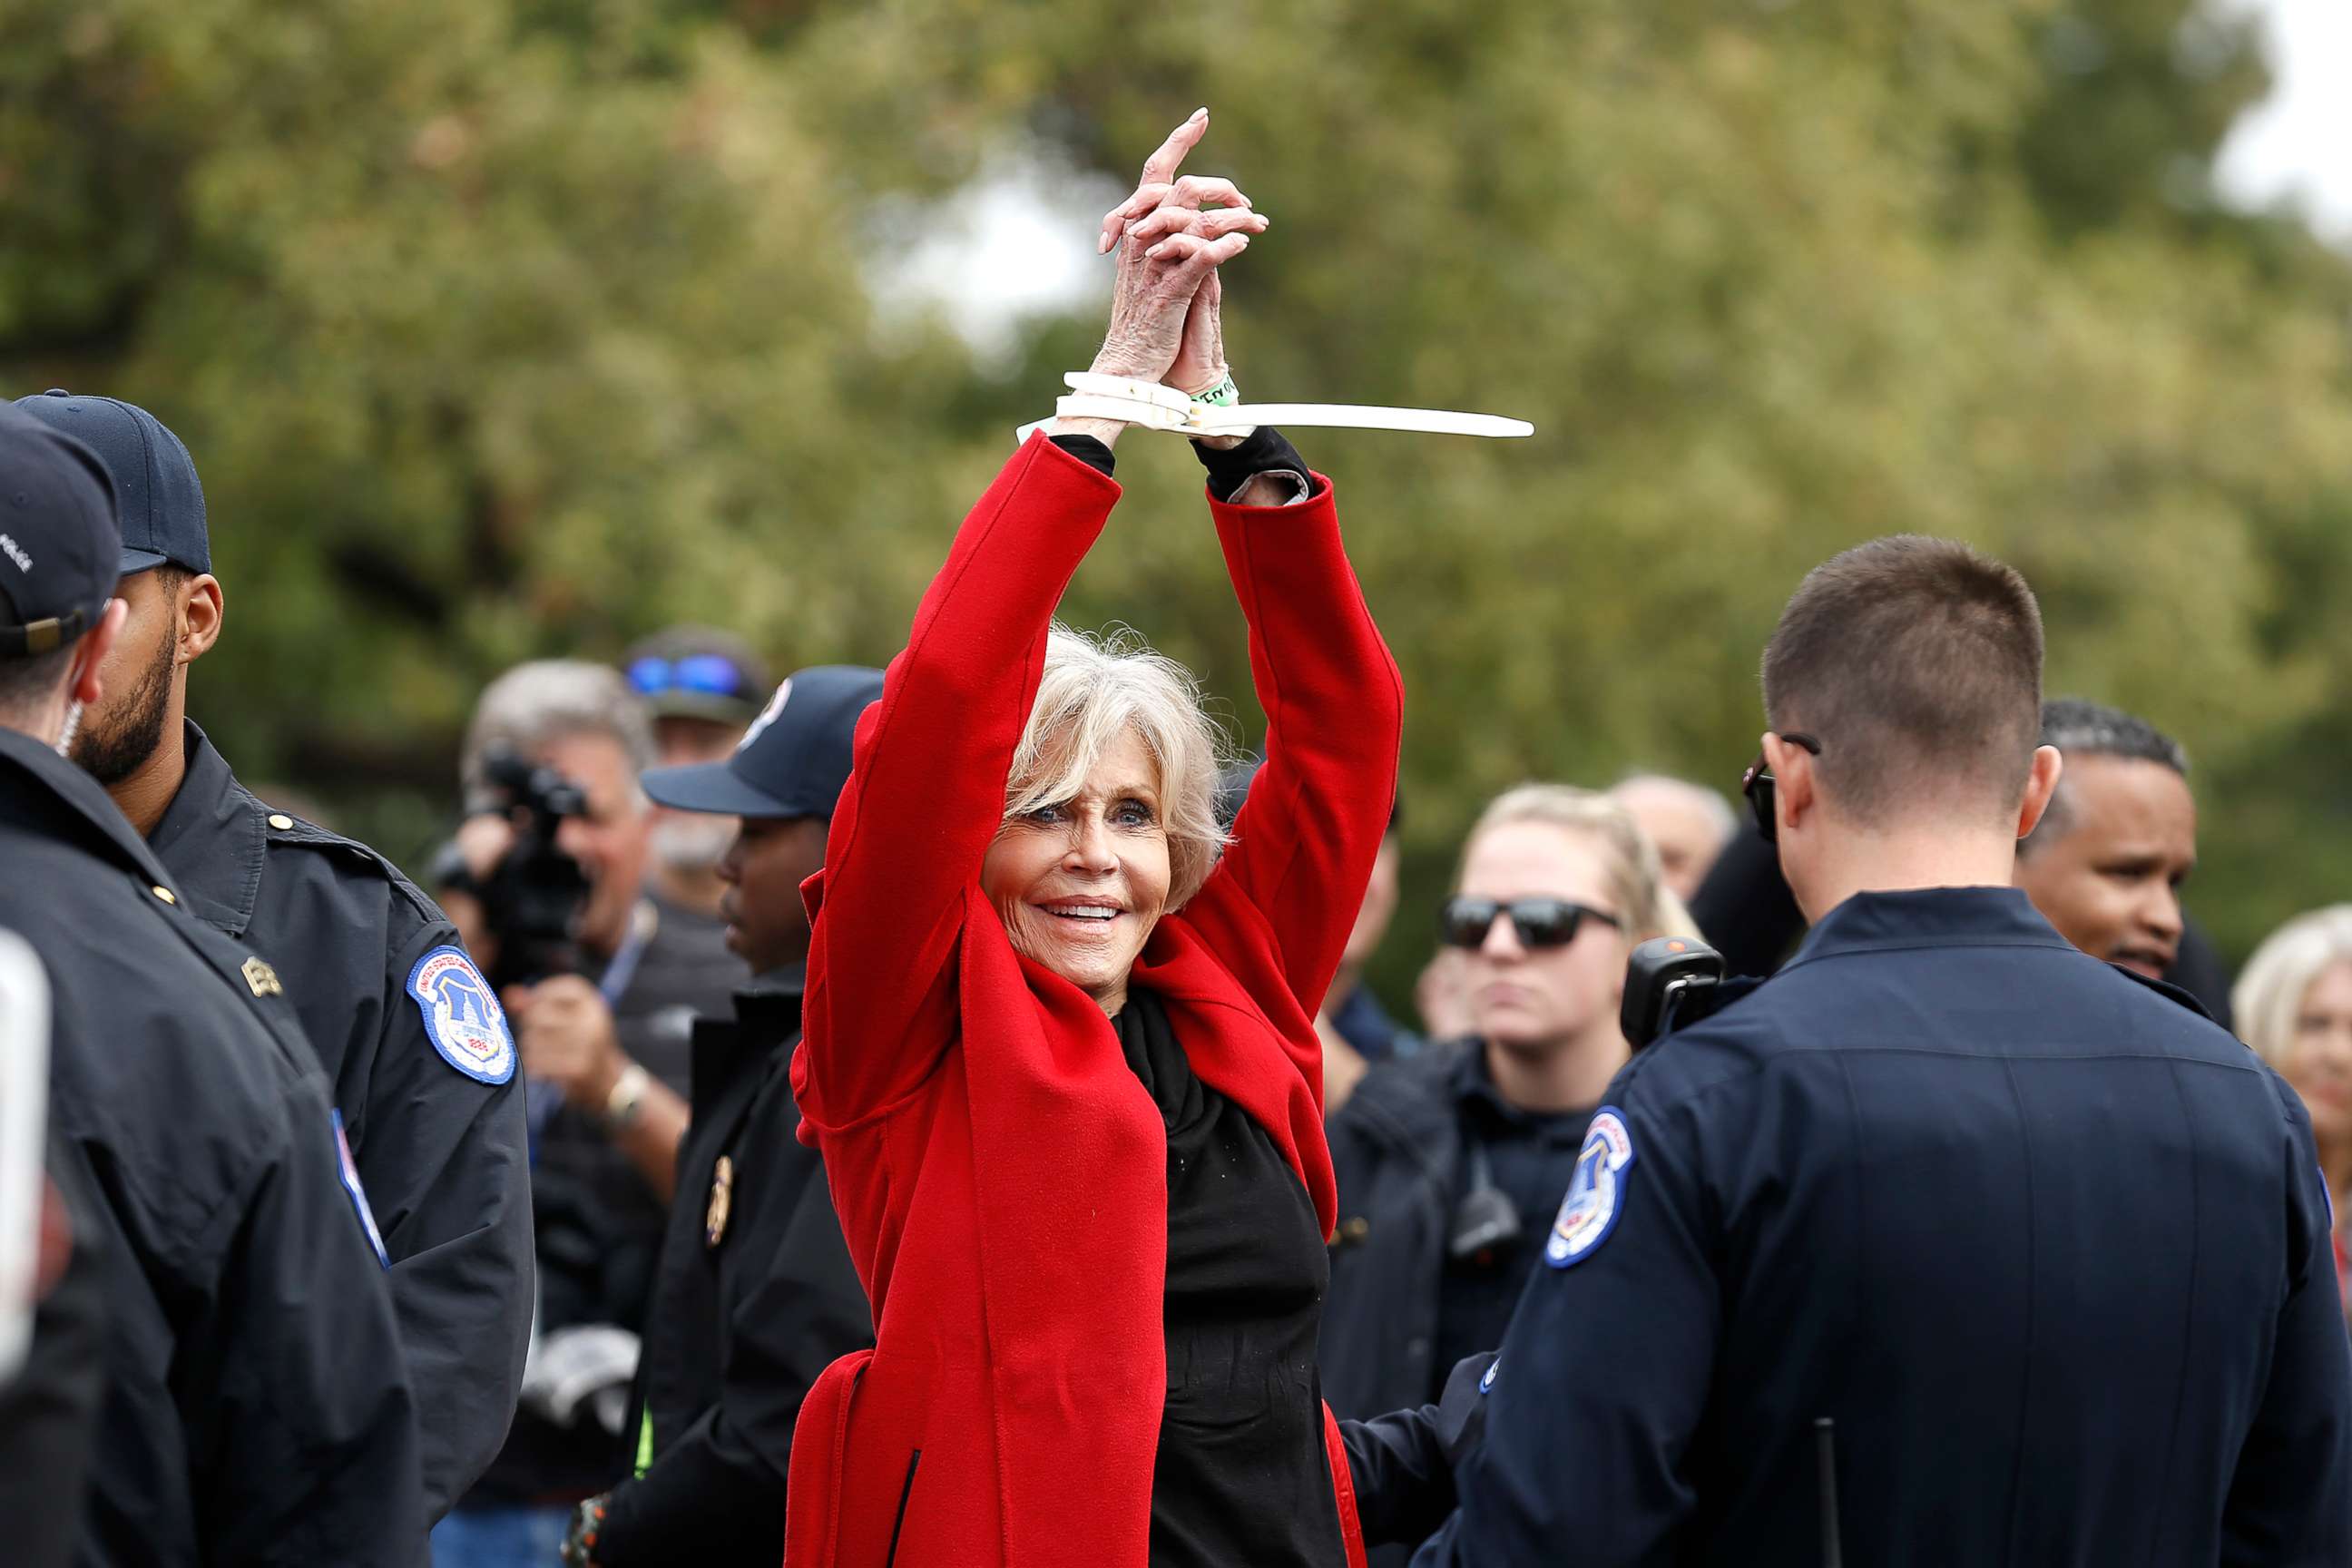 PHOTO: Actress Jane Fonda is arrested during the "Fire Drill Friday" Climate Change Protest on Oct. 25, 2019, in Washington, D.C.